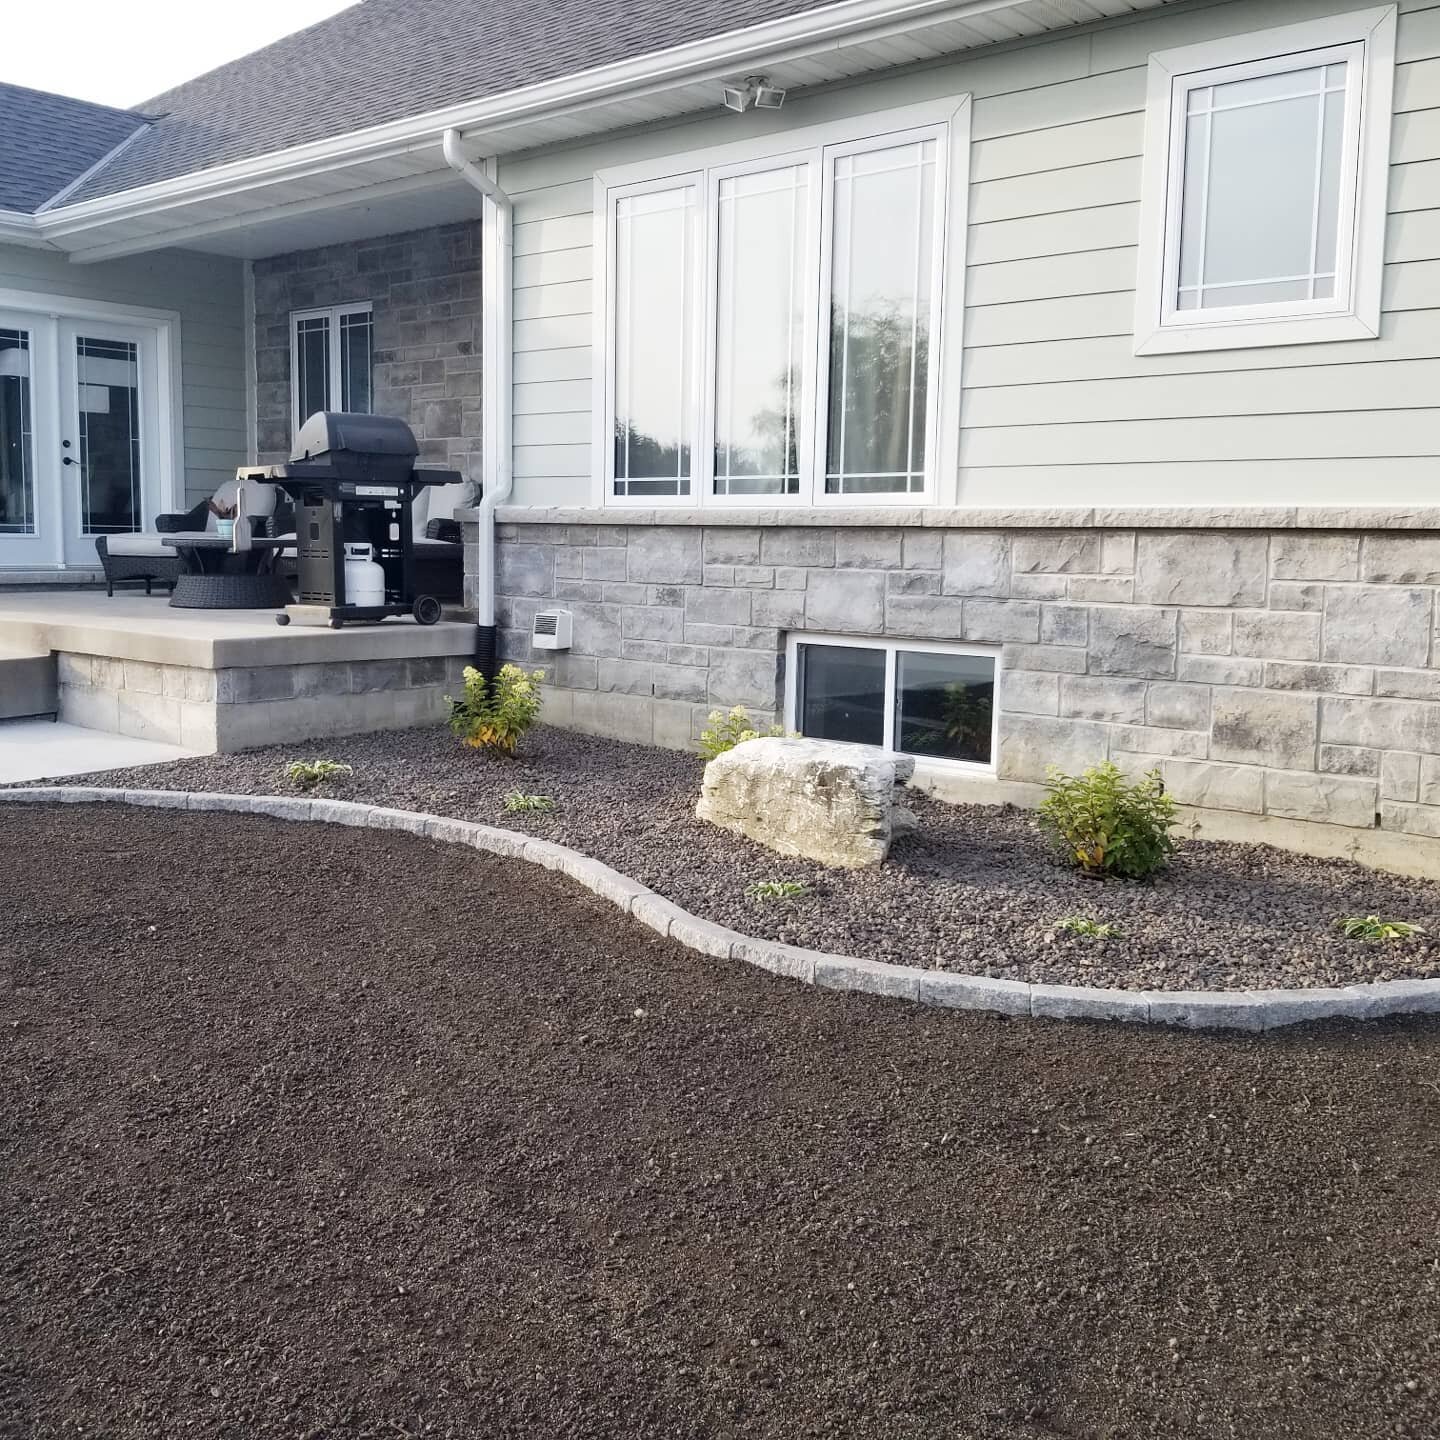 Here are the final pictures from the McArthur house. 

They were such a great family to work with, and we were so happy to help them transform their backyard for them and their 6 children. 

New concrete patio off back steps (gazebo coming soon), con